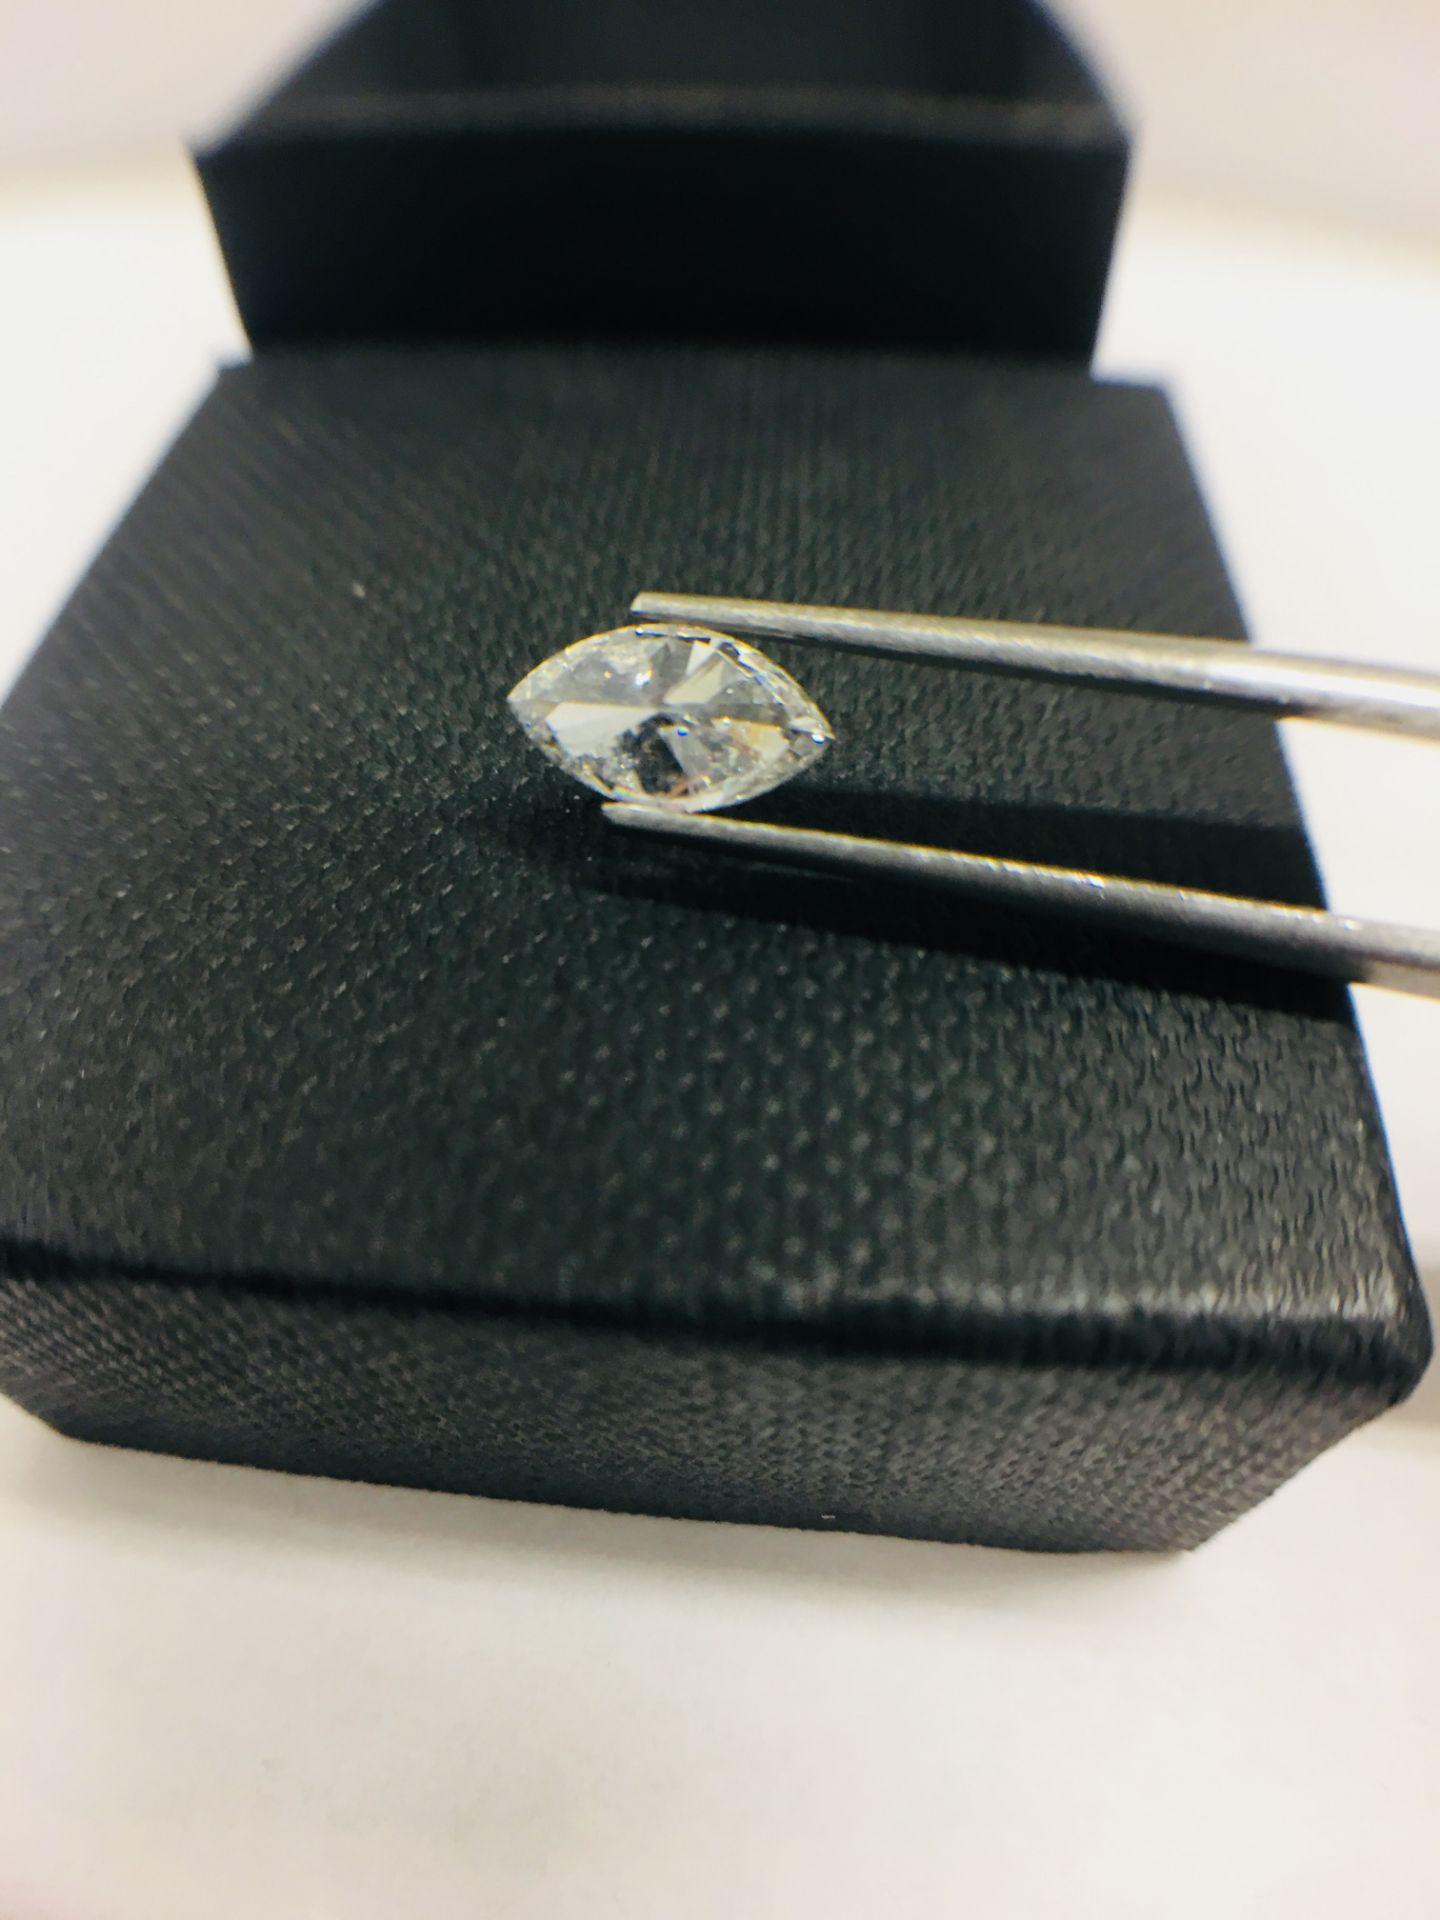 1.01ct Marquis cut Natural Diamond,H colour vs clarity,excellent cut,certificationcan be provided - Image 3 of 3